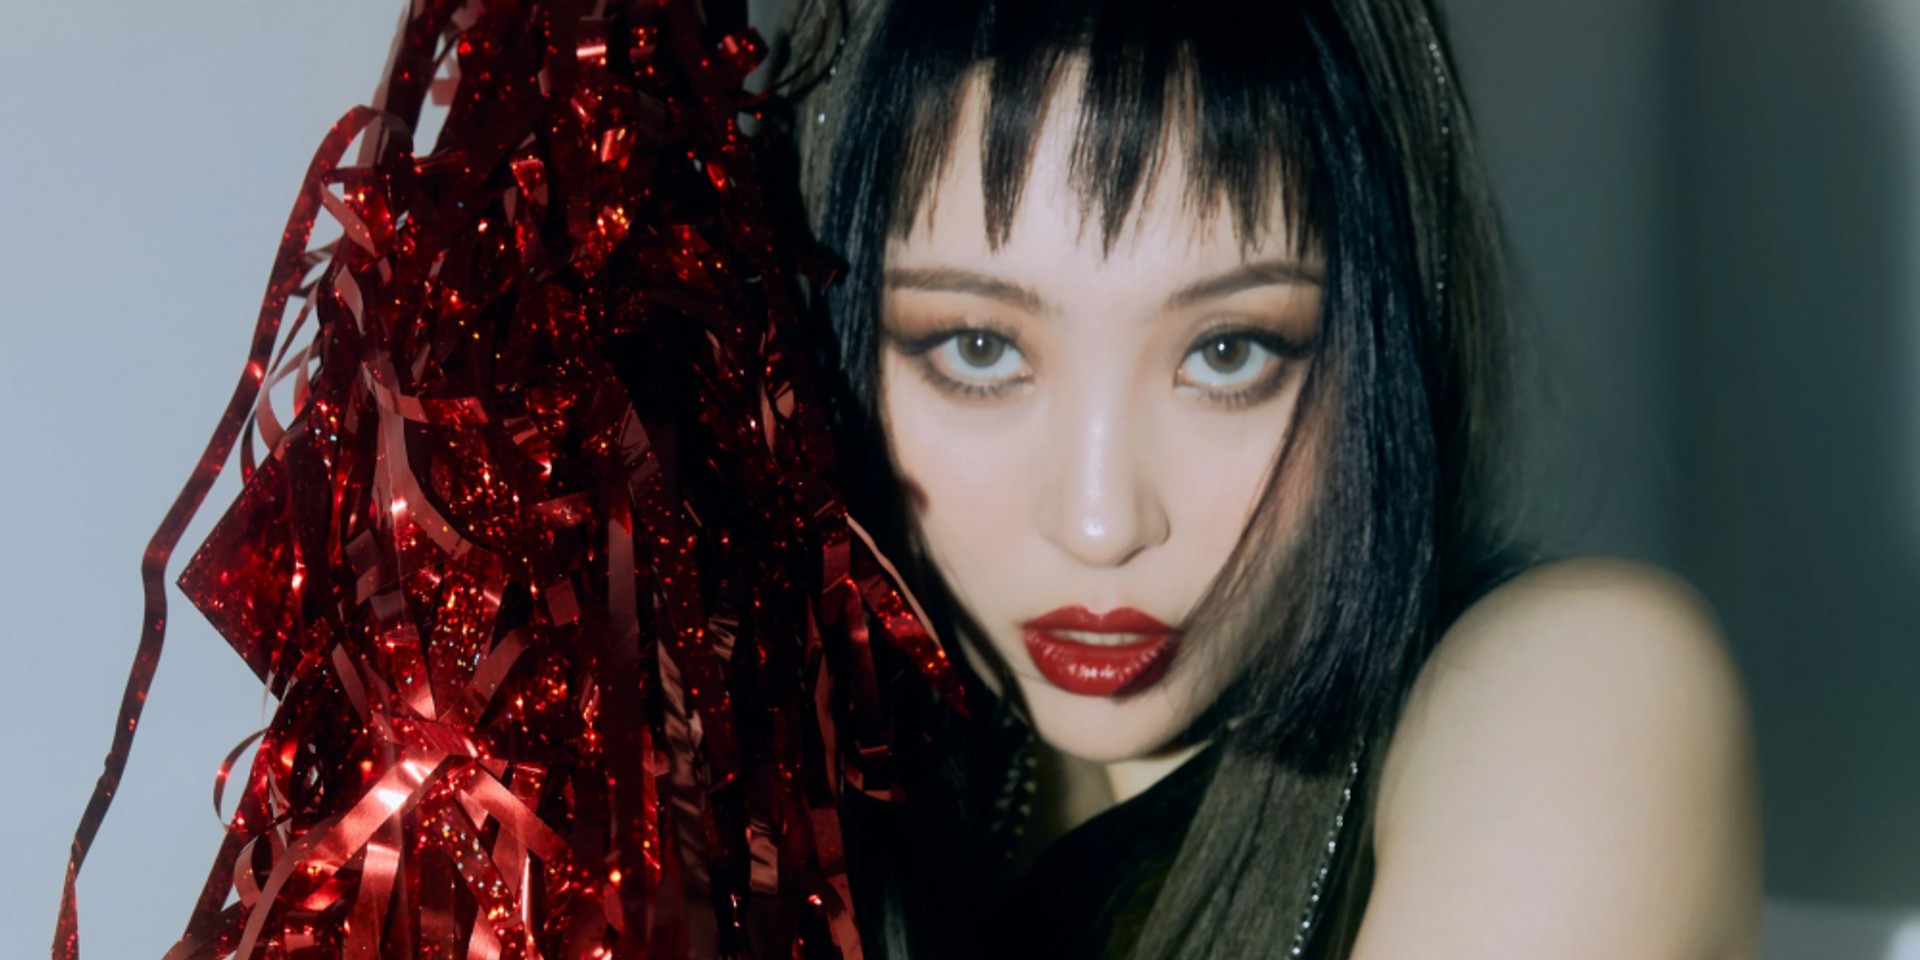 SUNMI joins first-ever EQUALS x Spotify Singles release with single 'Oh Sorry Ya' — listen